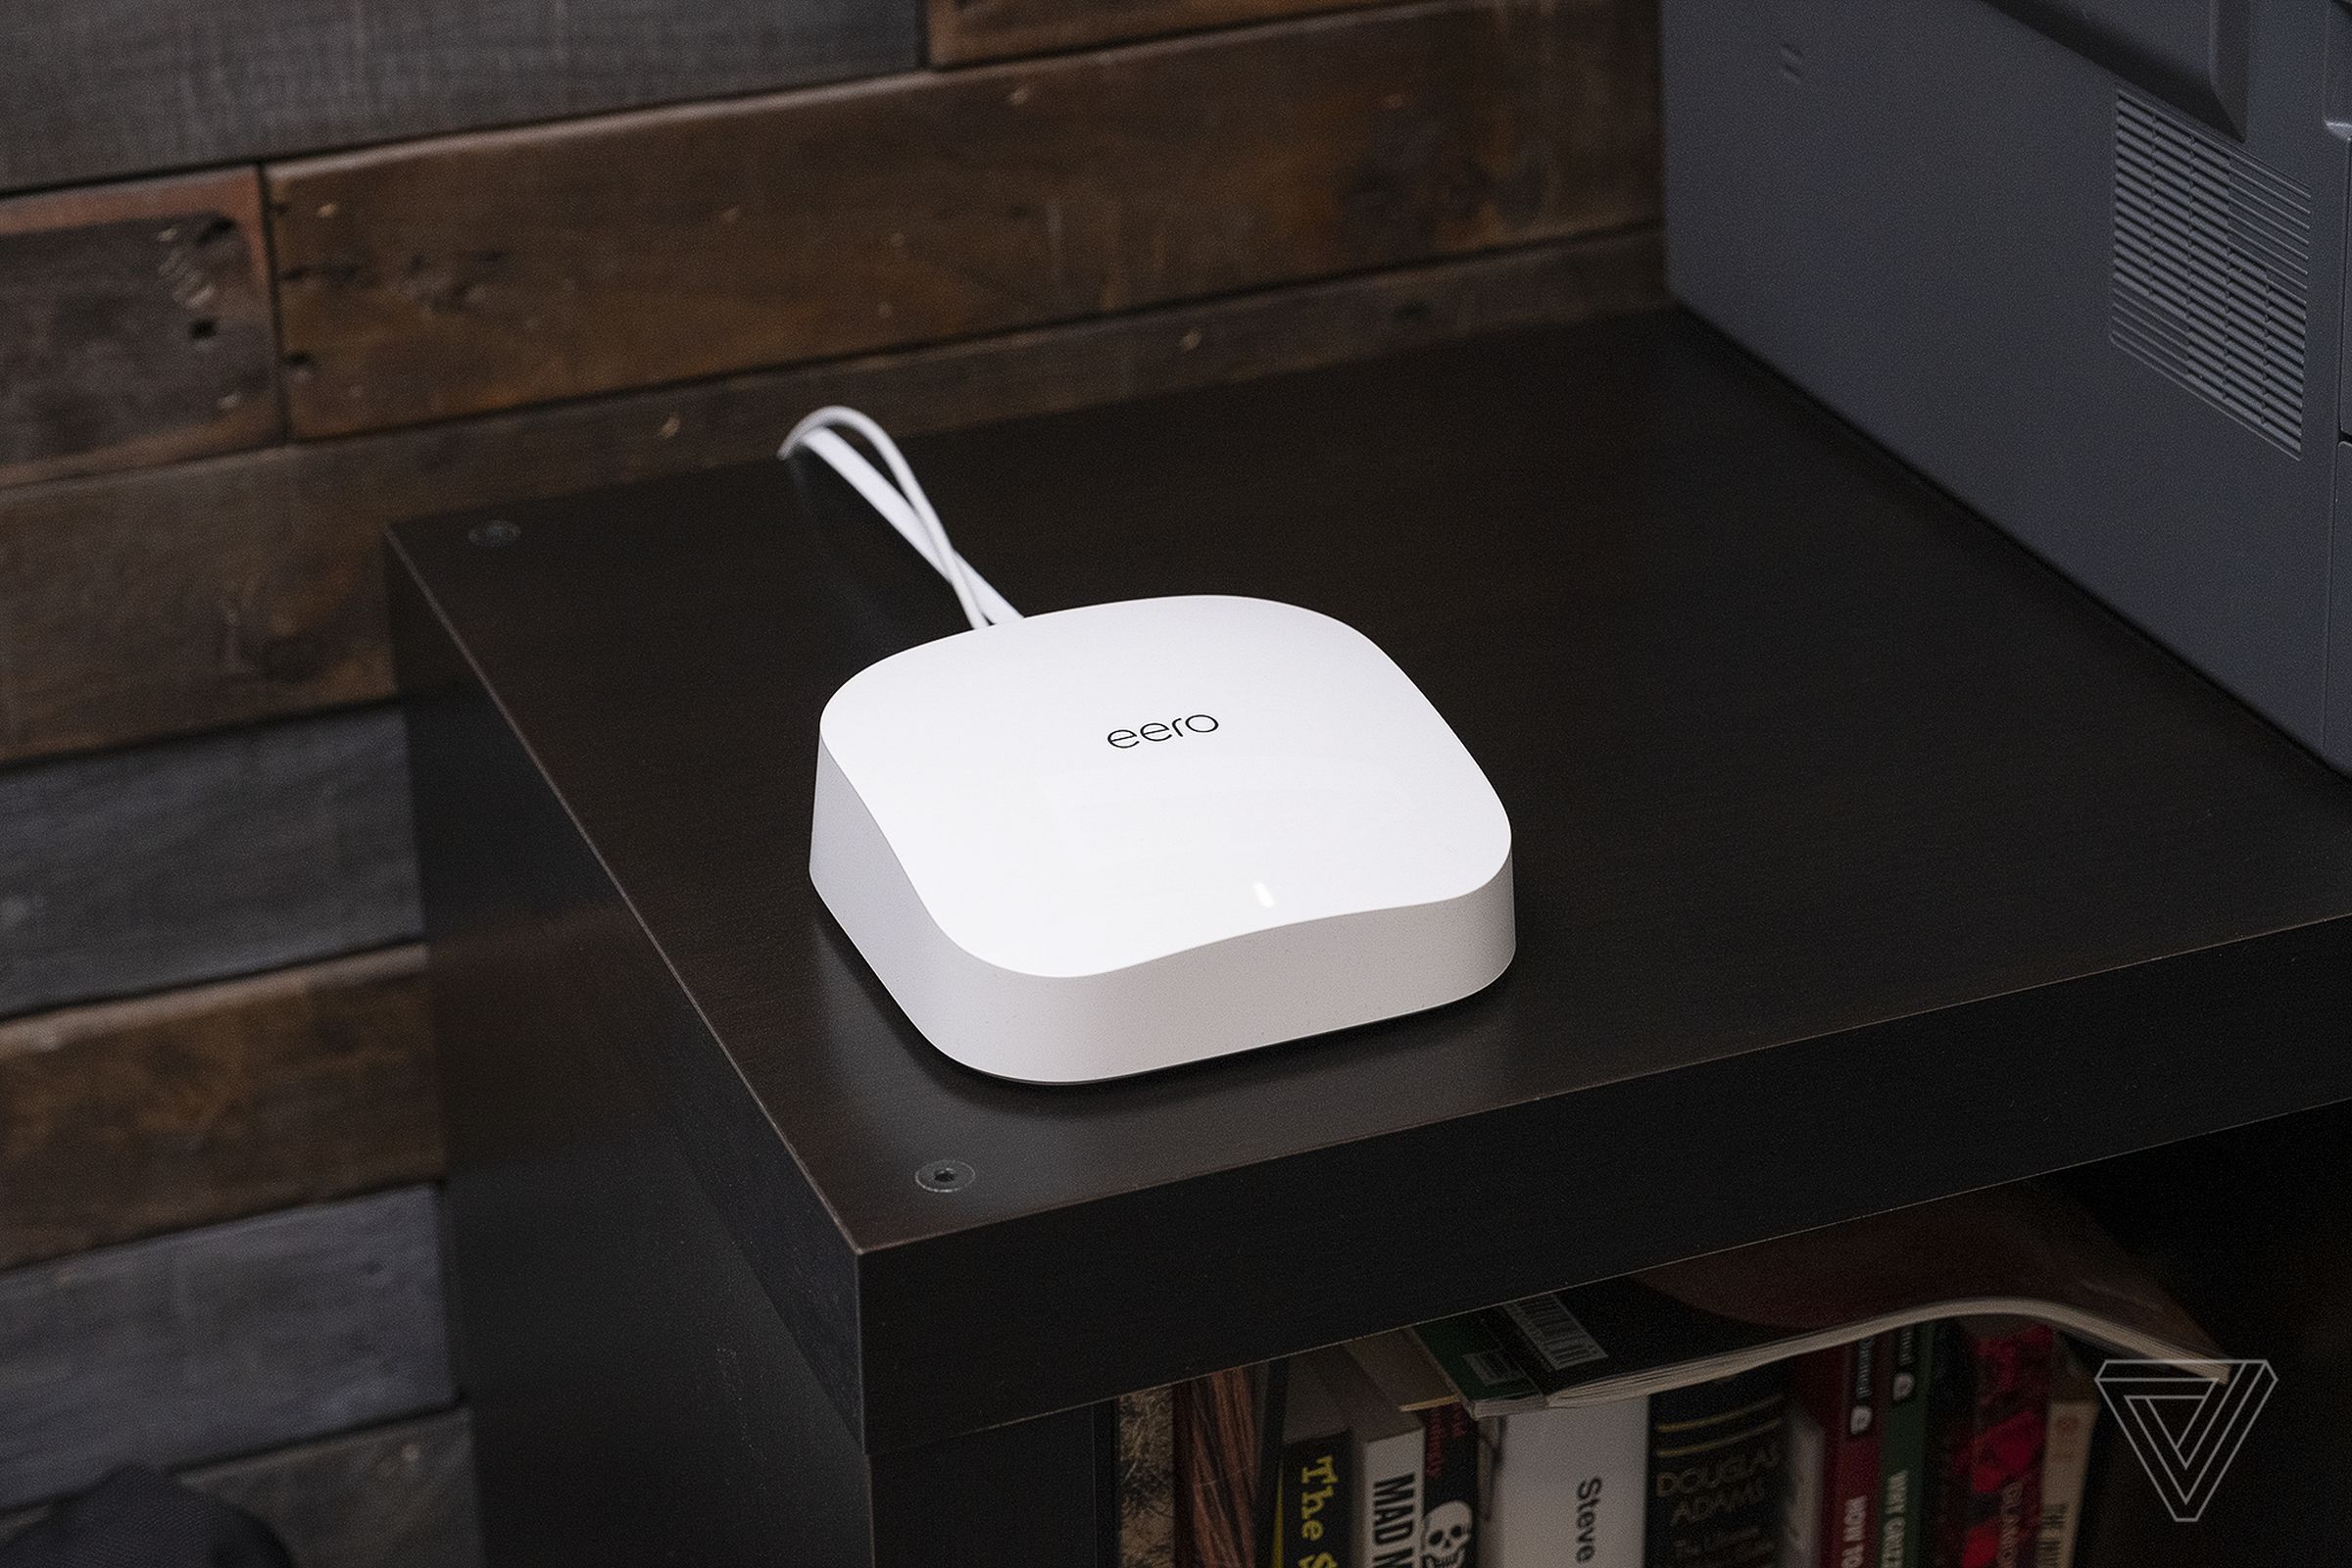 An Eero Pro 6 wireless Wi-Fi router sits on a wooden corner table.